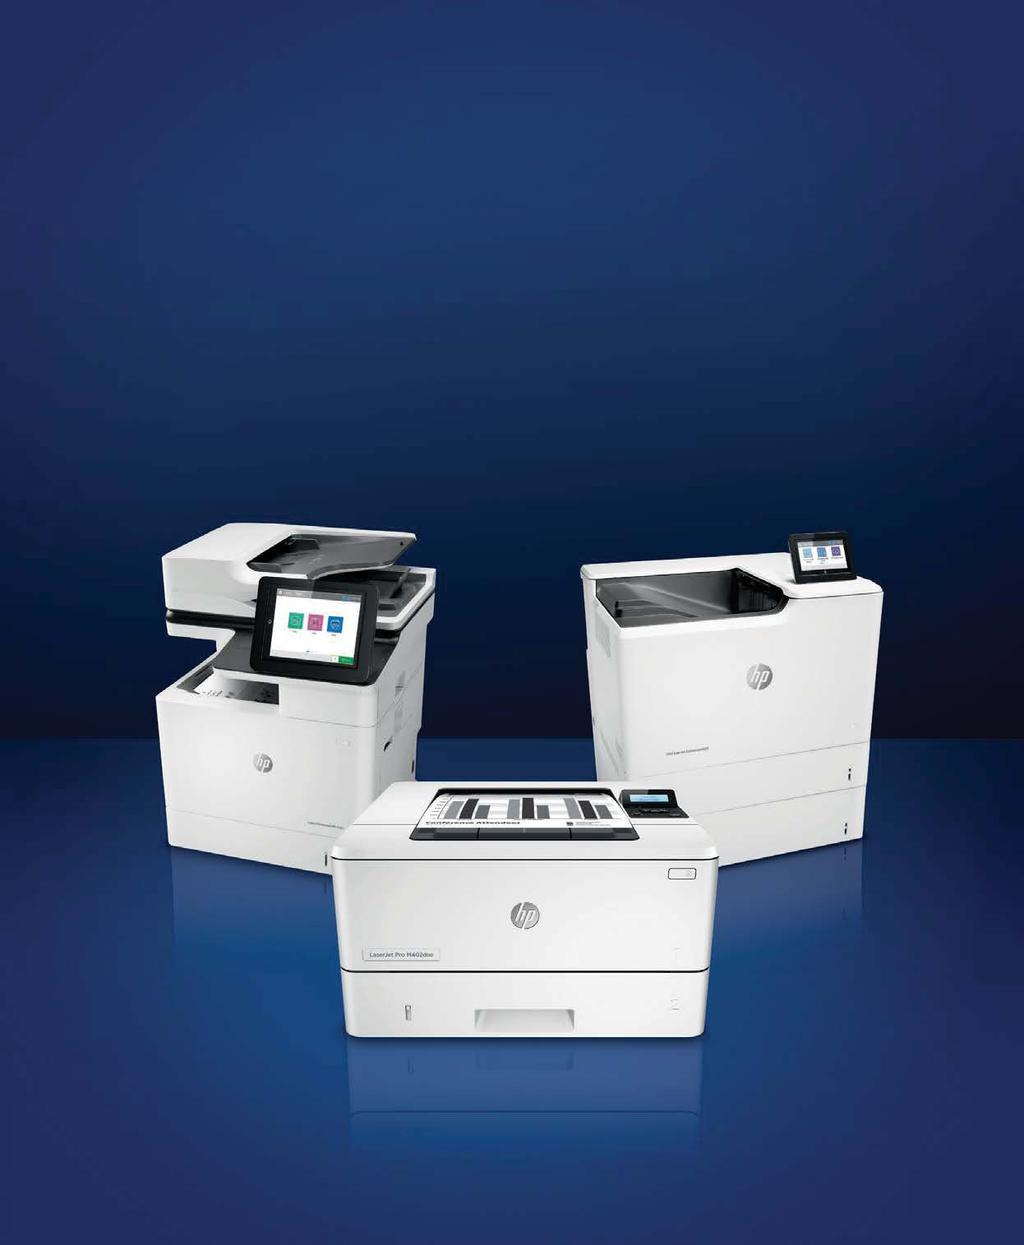 Blokken en schriften Worry-free printing for up to three years 1 when you use Original HP supplies!